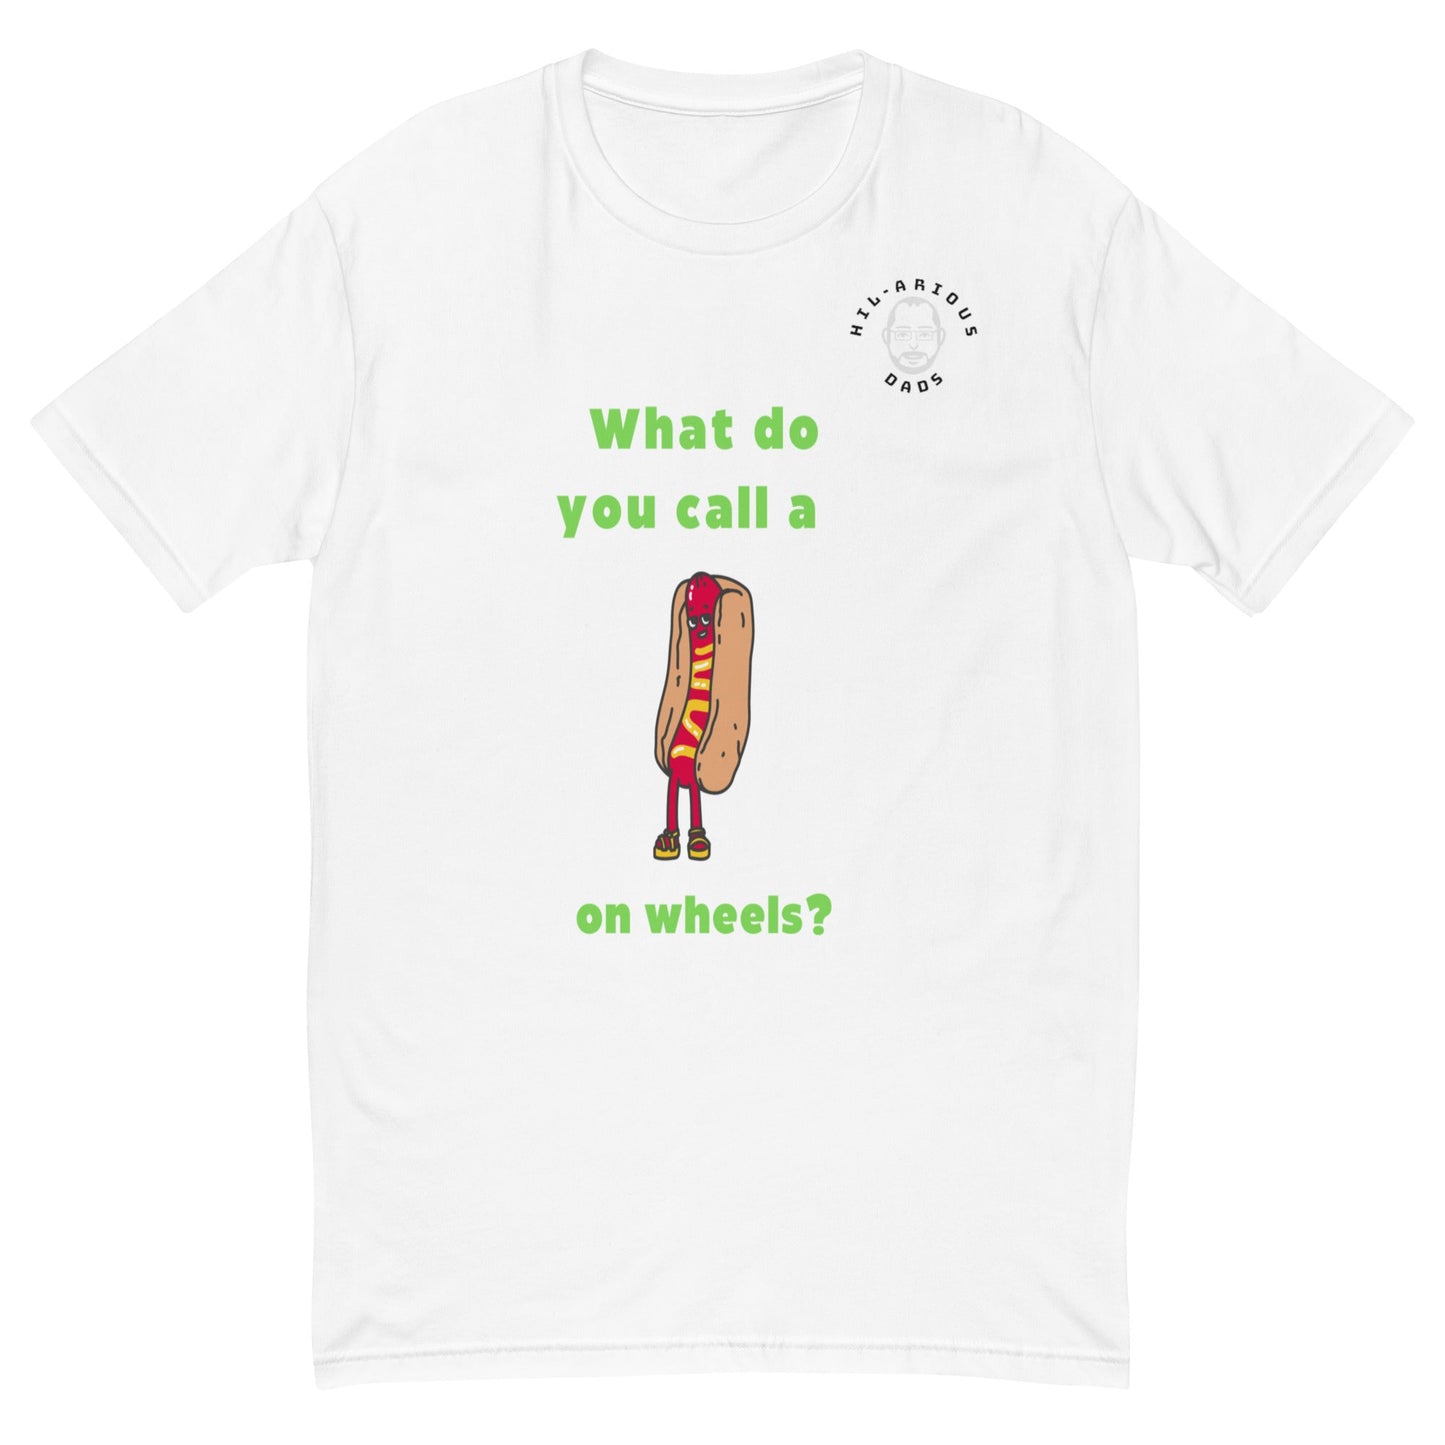 What do you call a hot dog on wheels?-T-shirt - Hil-arious Dads